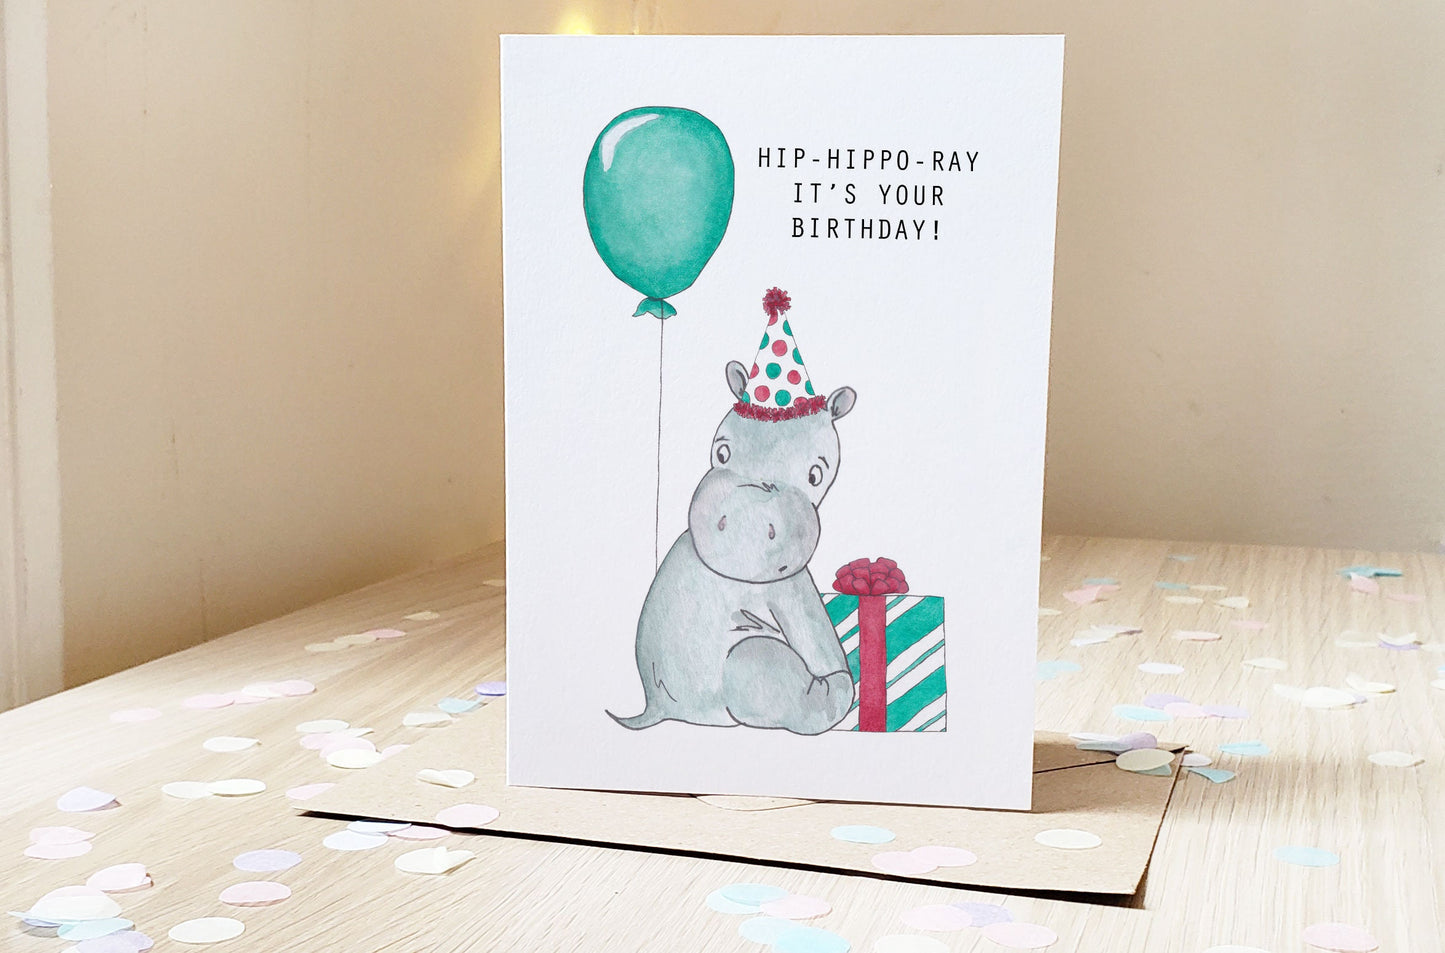 Hip-hippo-ray it's Your Birthday - Greeting Card